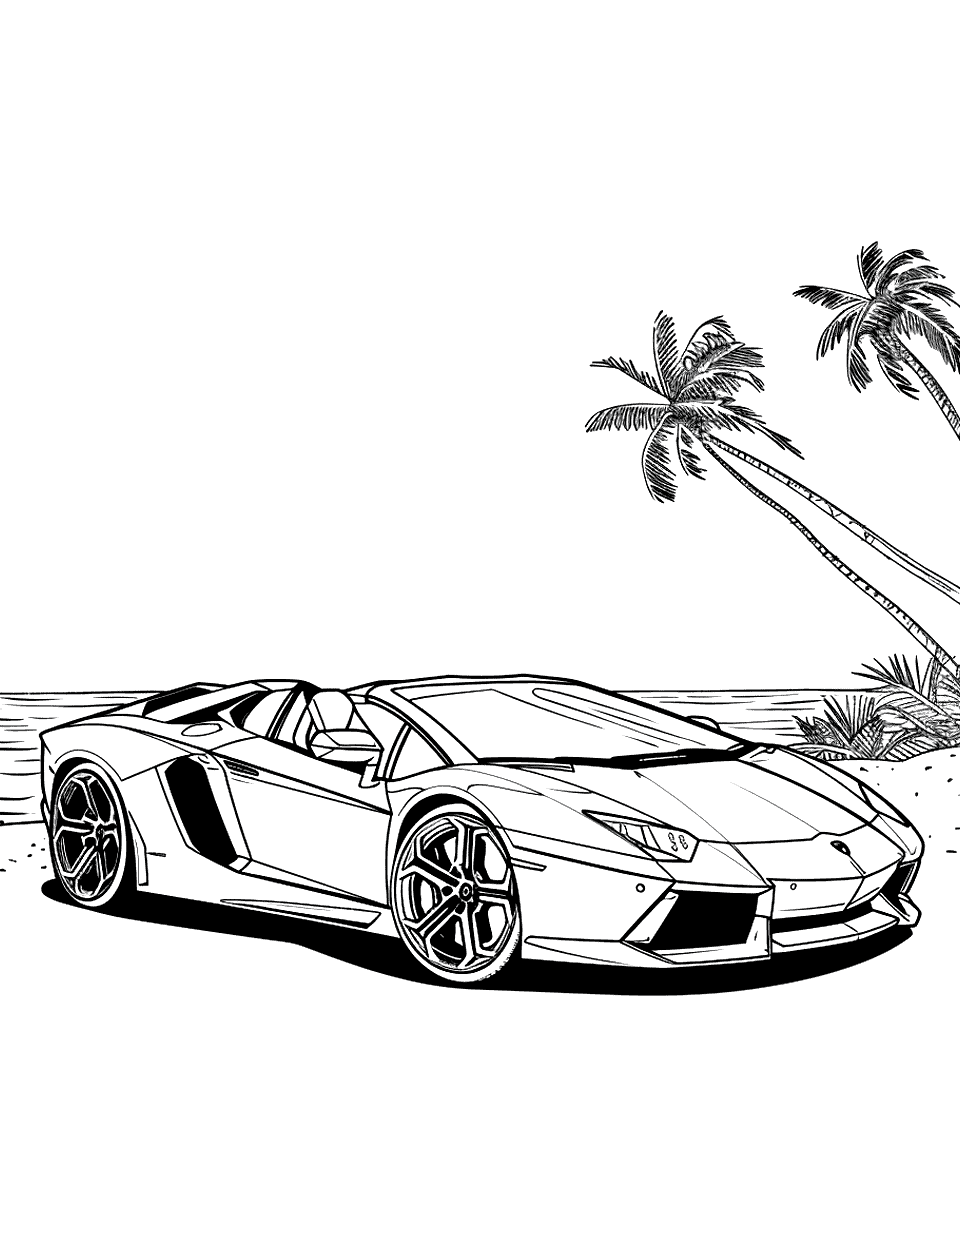 Convertible Day Out Lamborghini Coloring Page - A Lamborghini convertible with the top down, parked at a beachside.